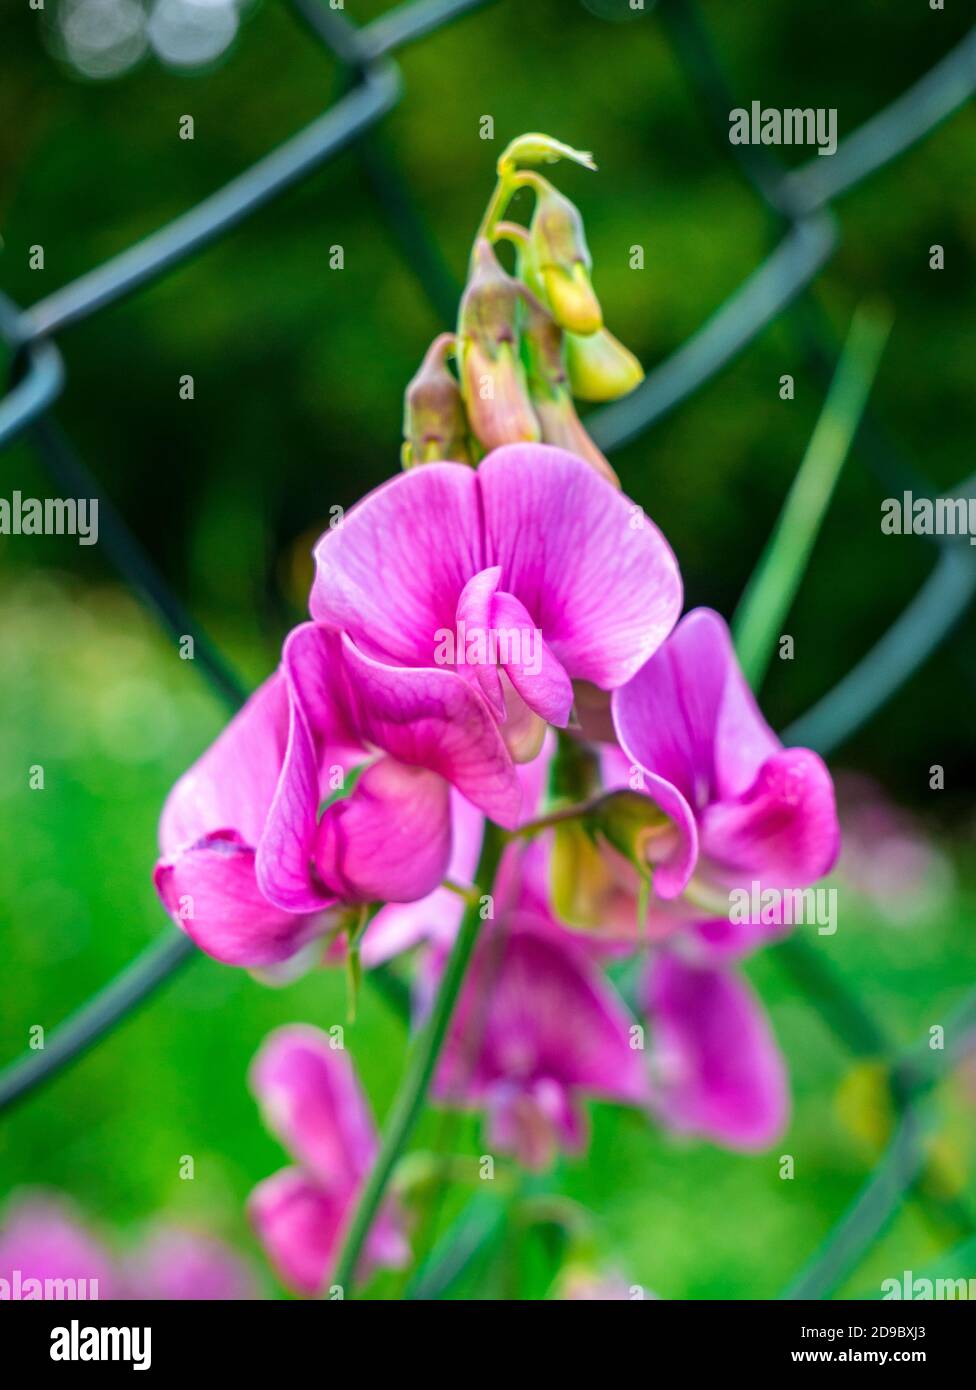 Close up of blooming sweet pea (Lathyrus tuberosus) with several buds, near a blurred wire fence in the background - Soft and selective focus Stock Photo